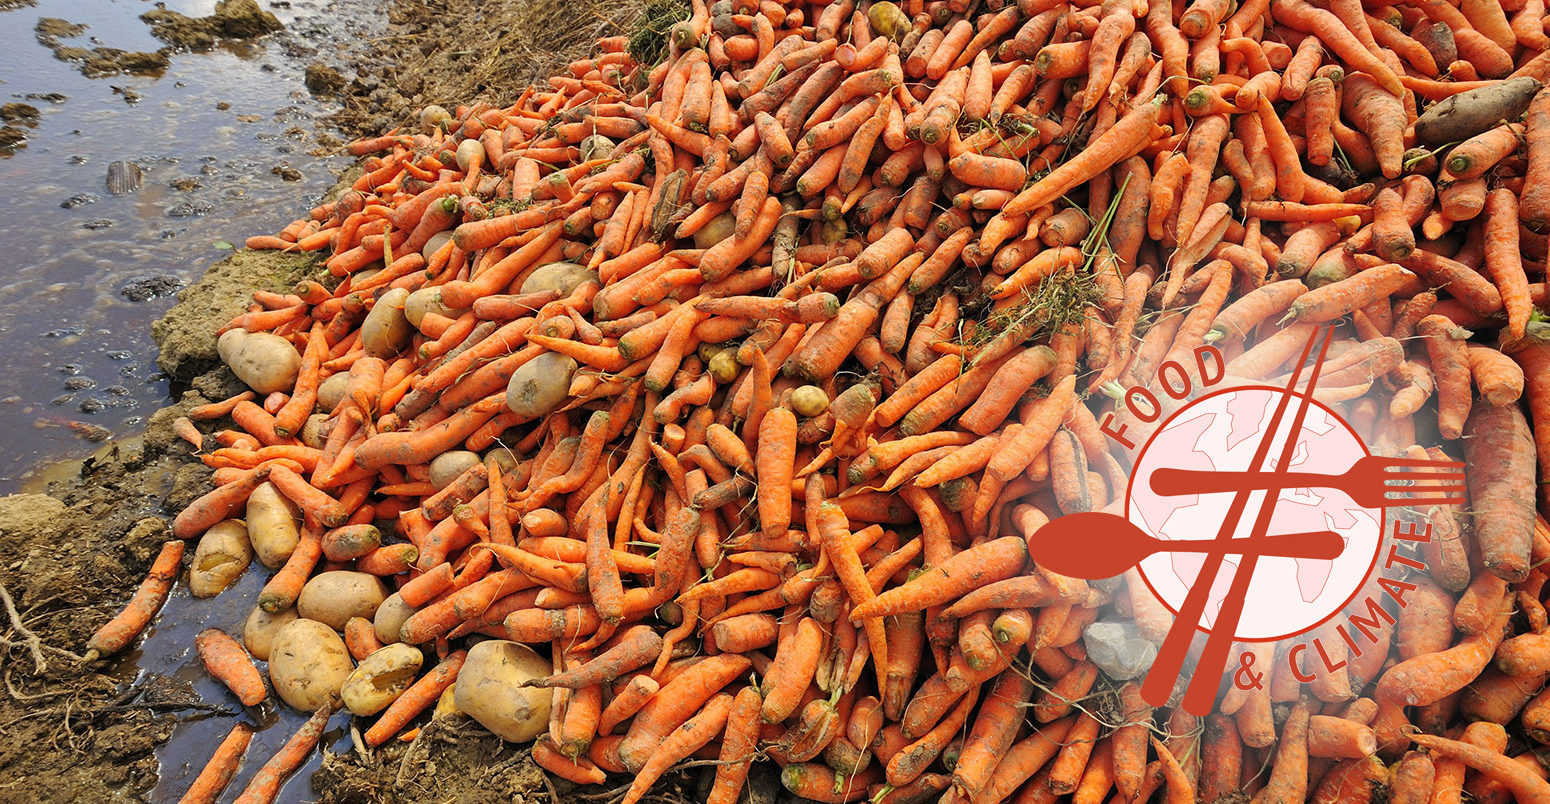 A pile of waste carrots with a few potatoes spilling out. Credit: Alistair Scott / Alamy Stock Photo.. B1YNT9